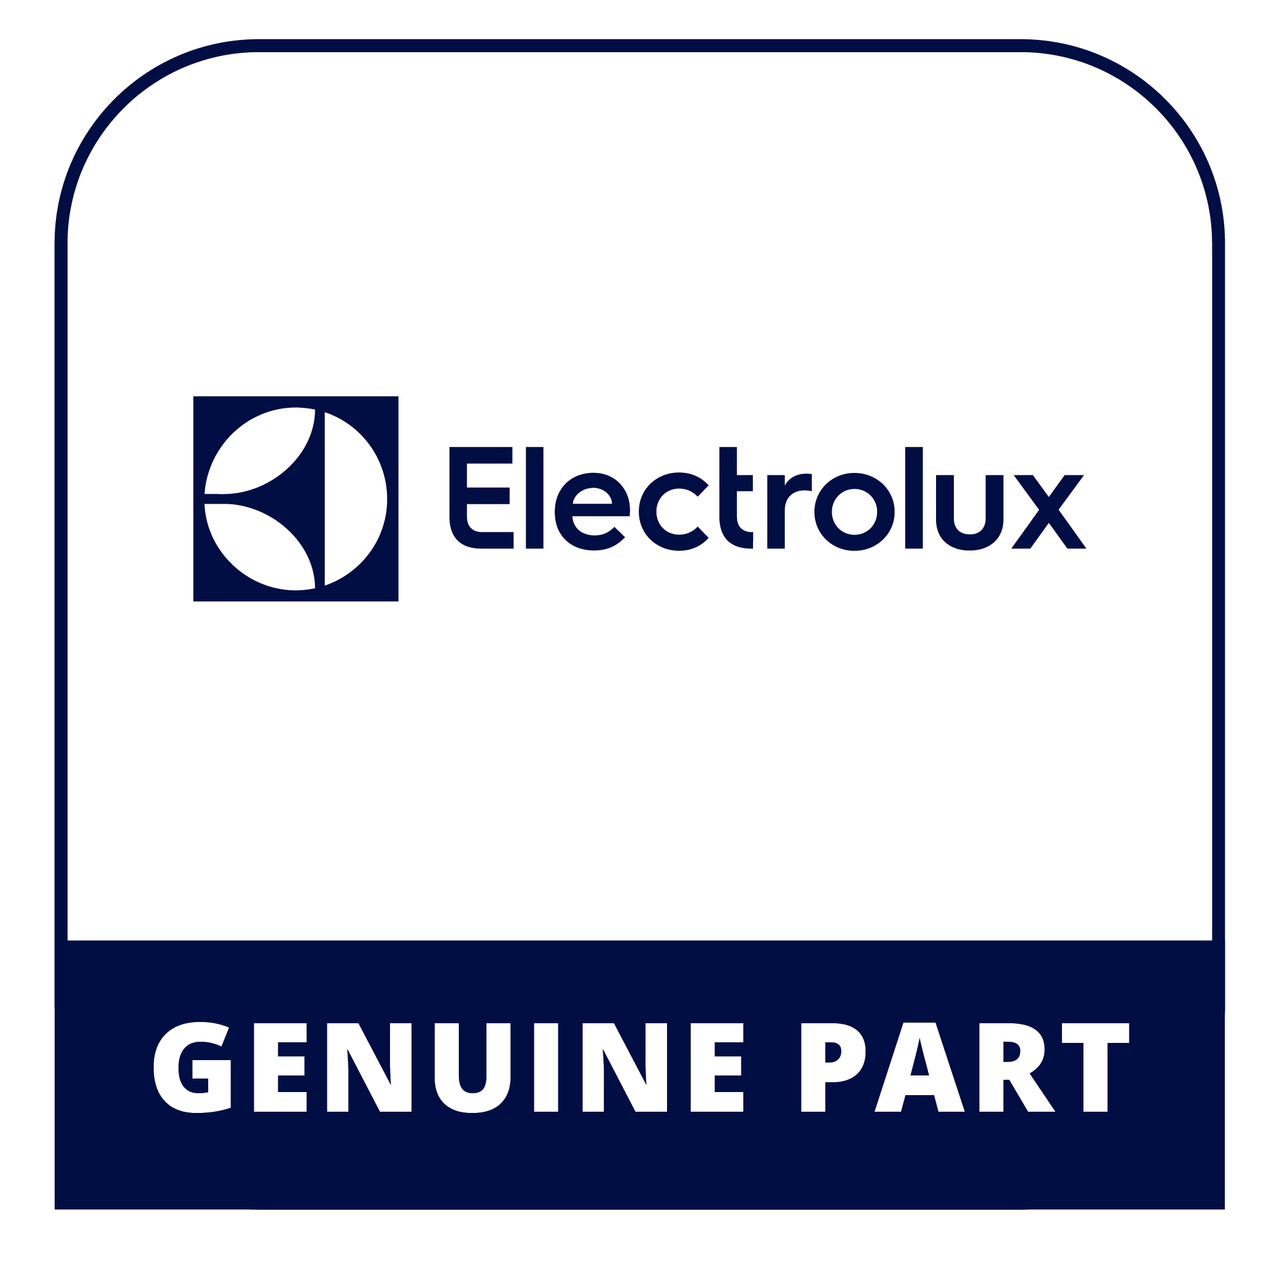 Frigidaire - Electrolux 318205874 Owners Manual - Genuine Electrolux Part